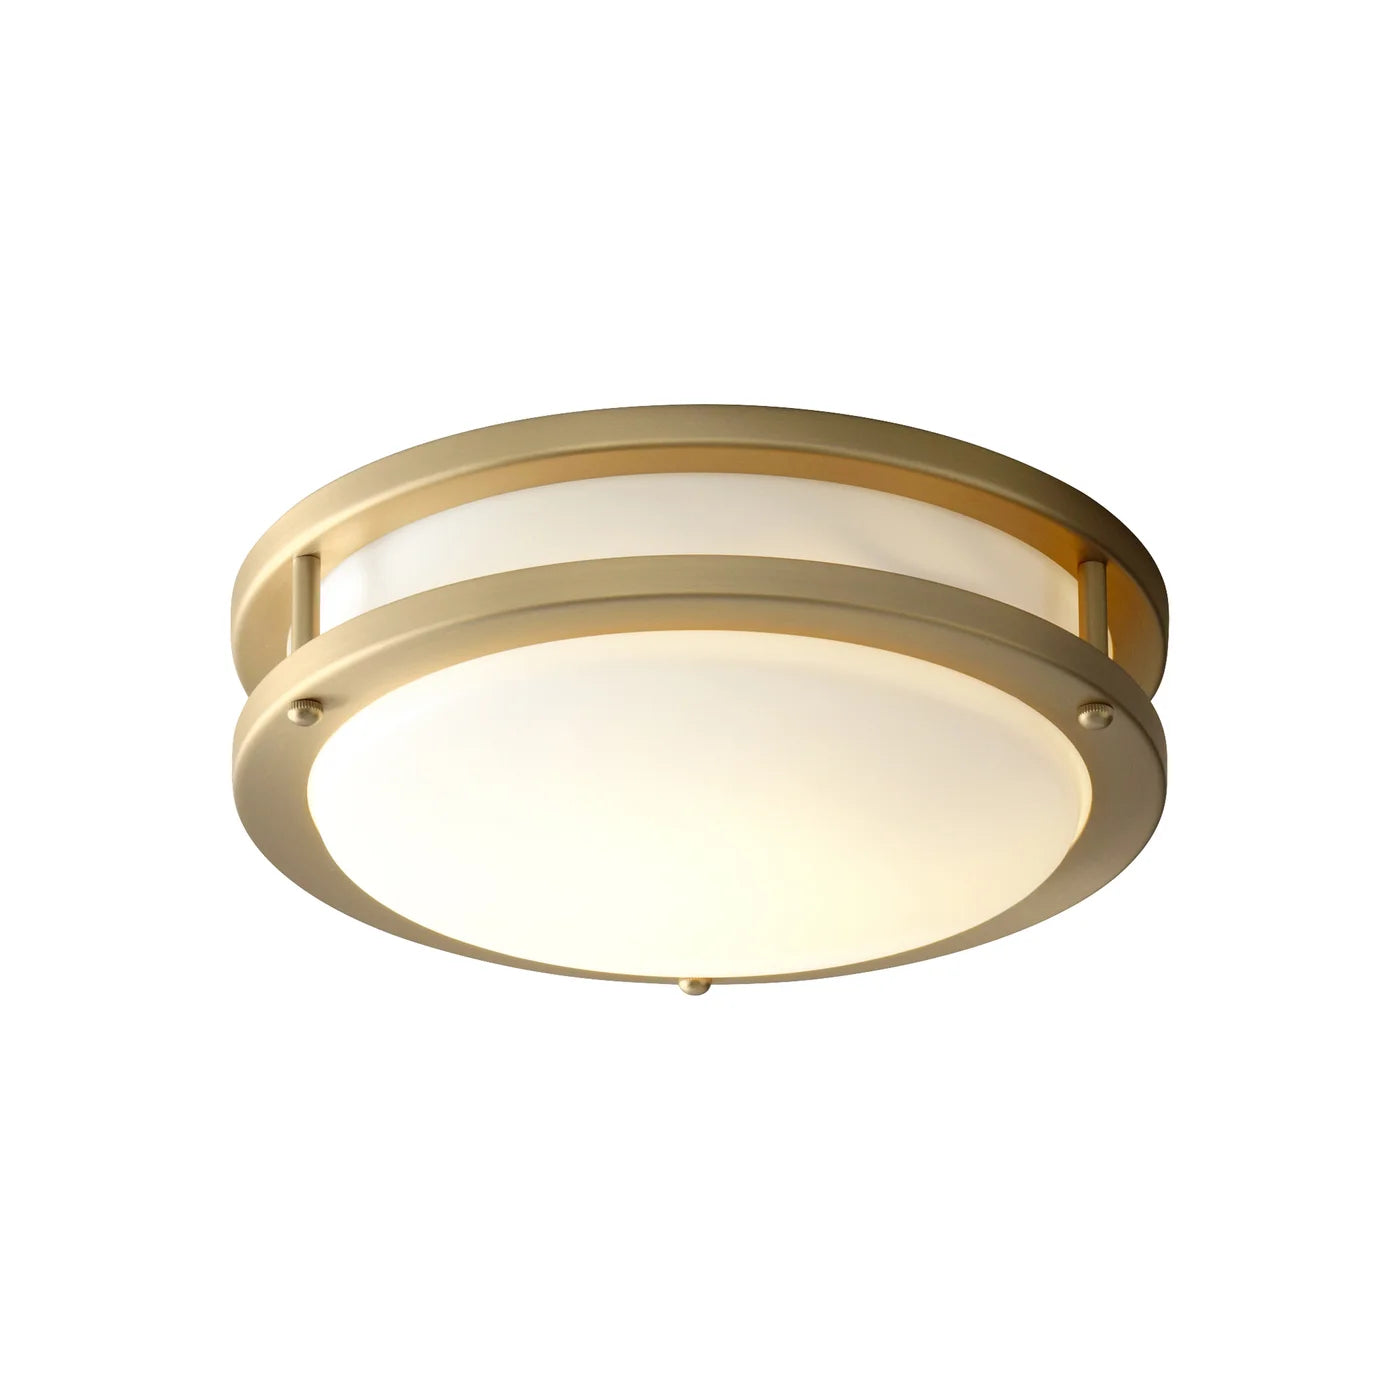 Oxygen Oracle 3-618-40 Flush LED Ceiling Mount Light, ADA Compliant, Damp Rated - Aged Brass